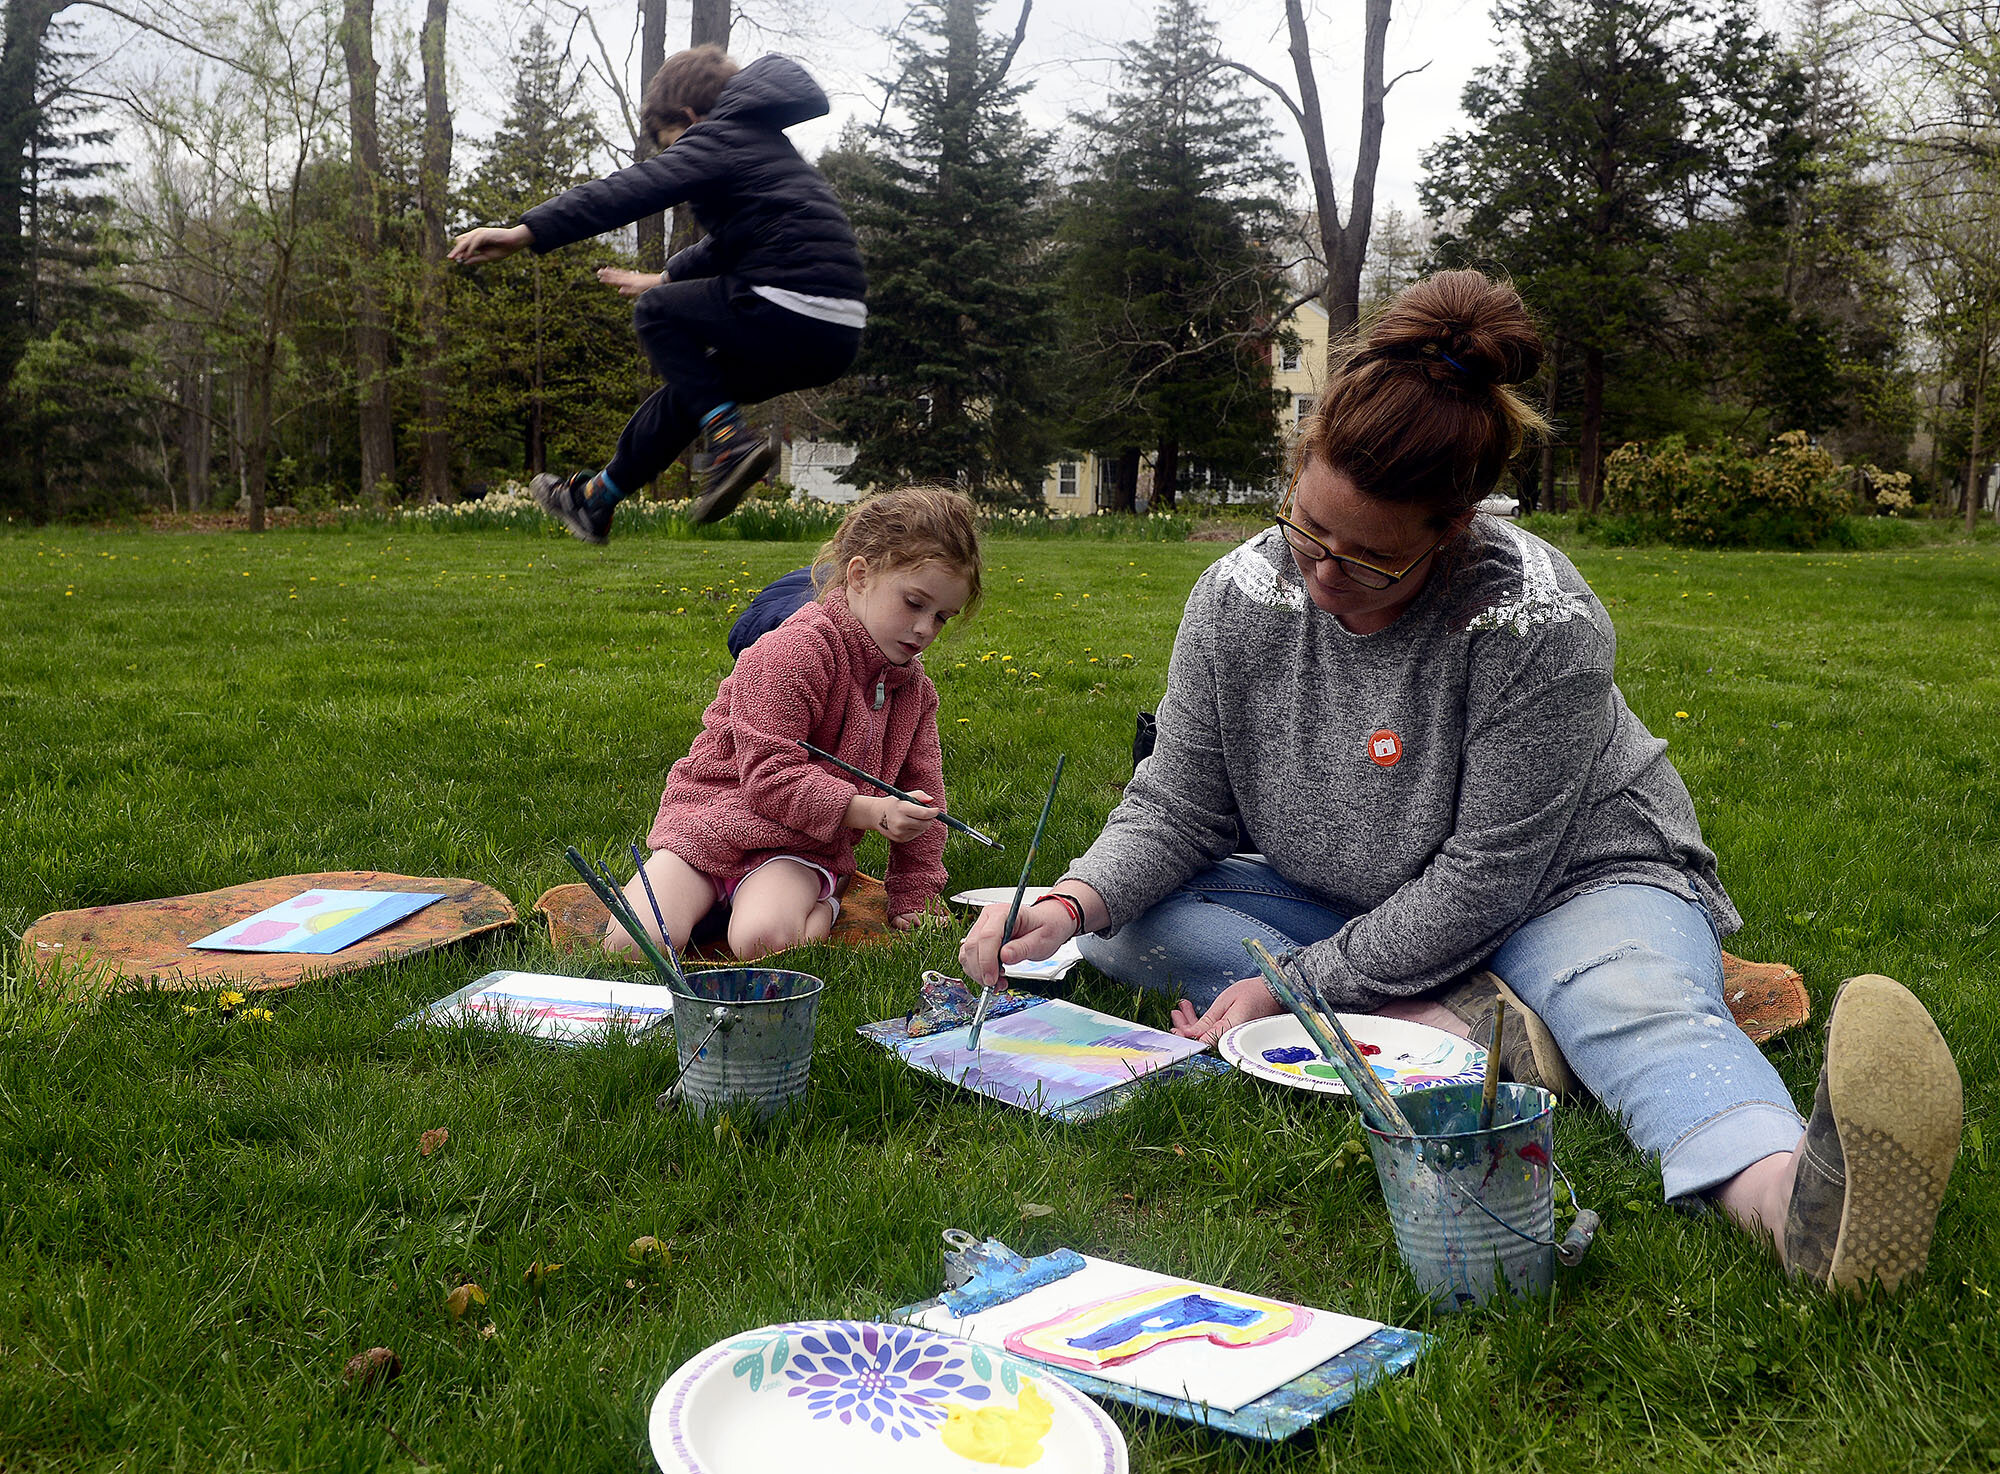  Caitlyn Chapin, right, of Old Saybrook works on painting with her daughter Mae, 5, as her son John, 8 plays leap frog with Emma, 9, during a community free day on Sunday, May 6, 2018, at Florence Griswold Museum. (The Day)  